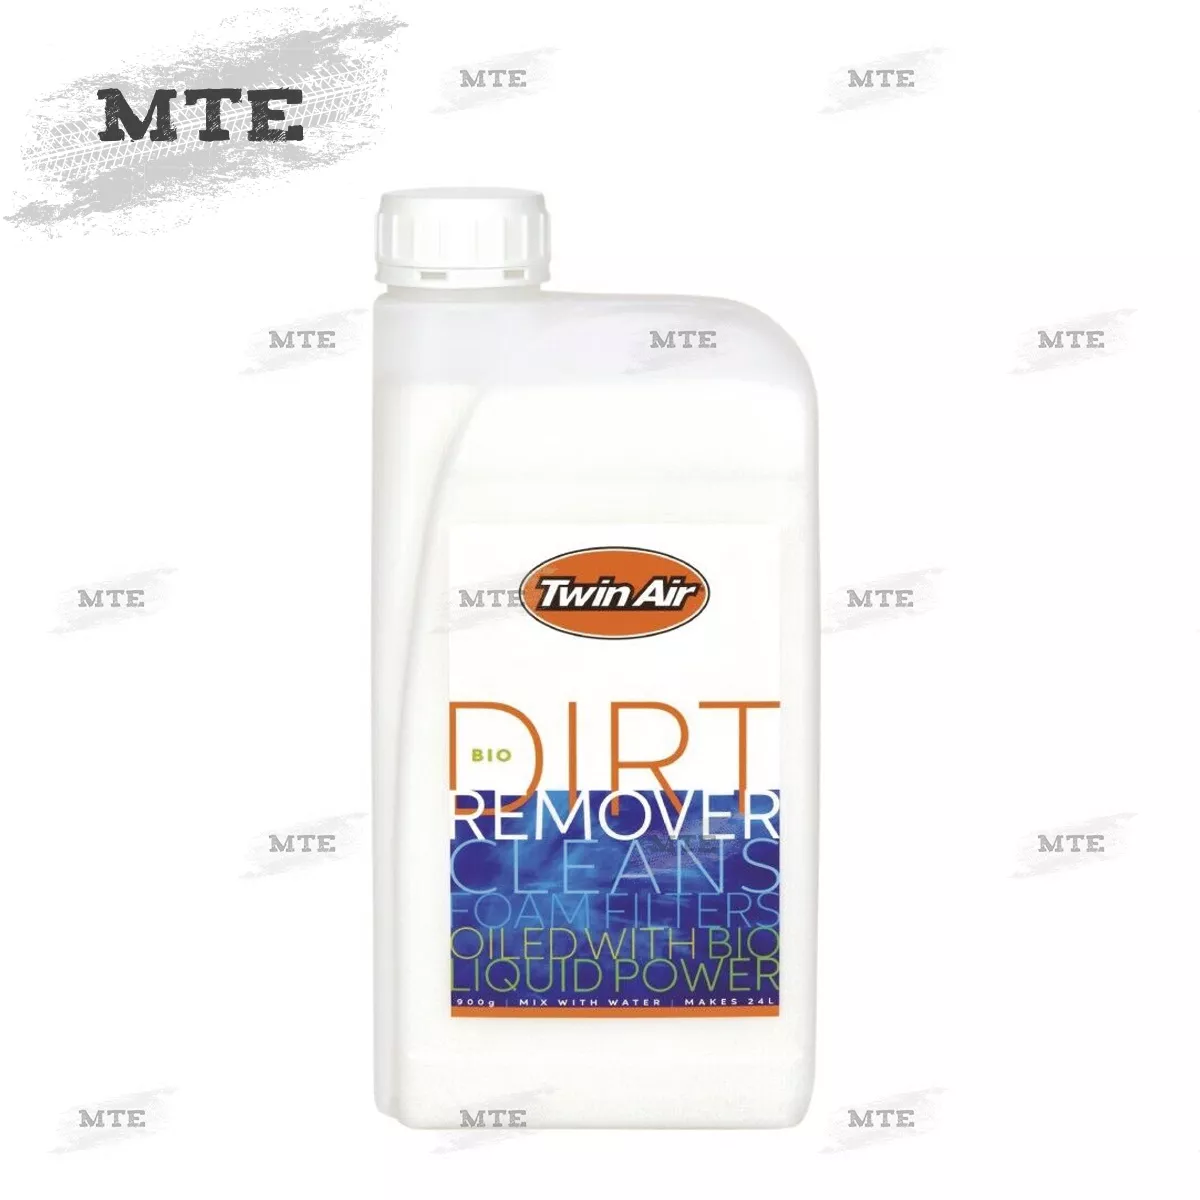 TWIN AIR BIO DIRT REMOVER AIR FILTER CLEANER 900 G